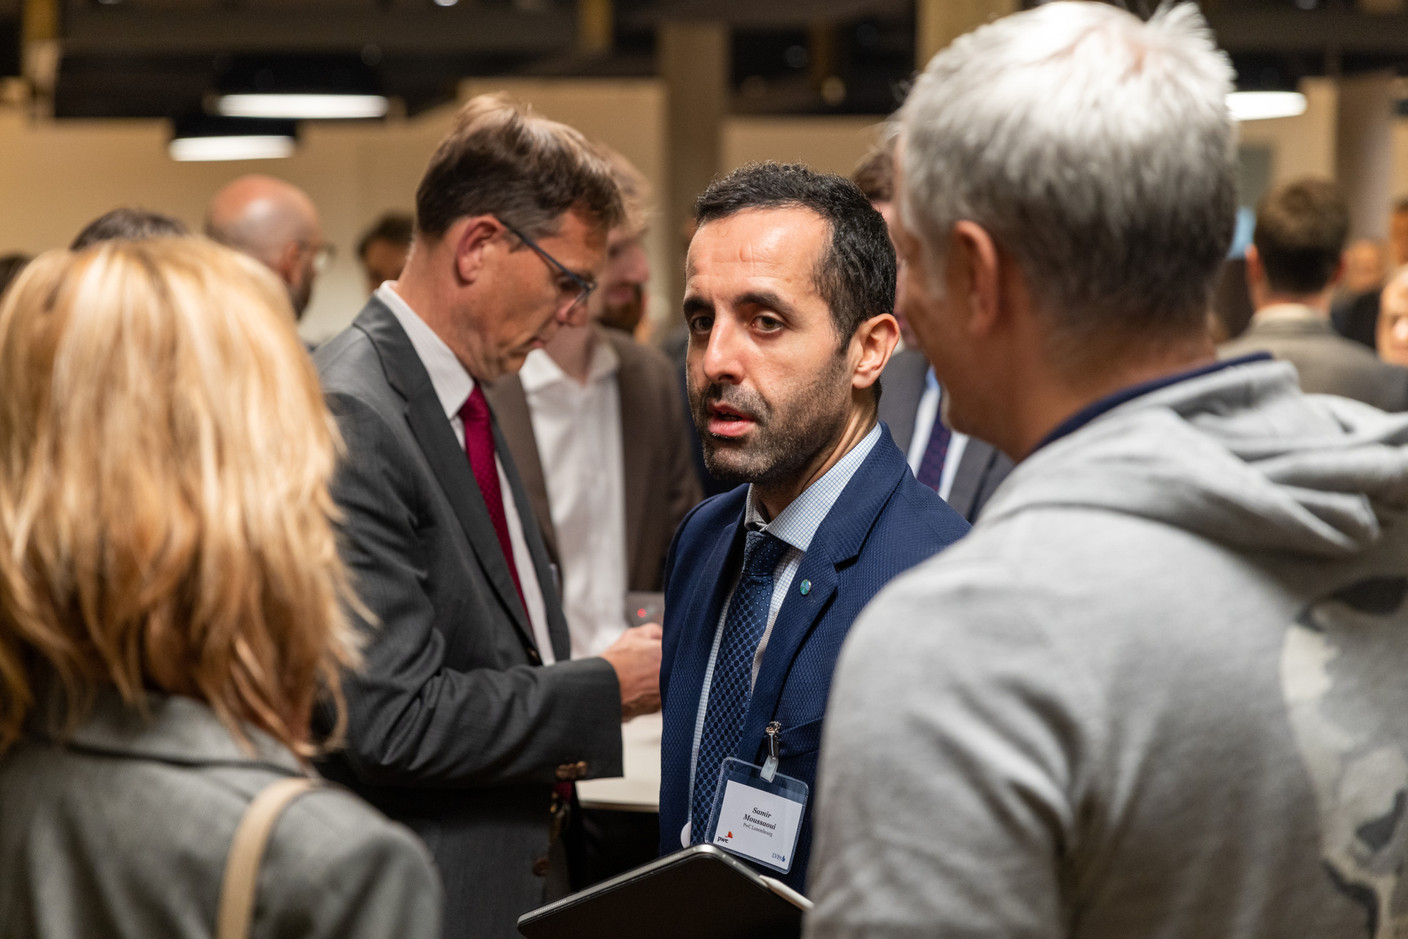 Samir Moussaoui and other attendees at the LVPA’s launch event. Romain Gamba